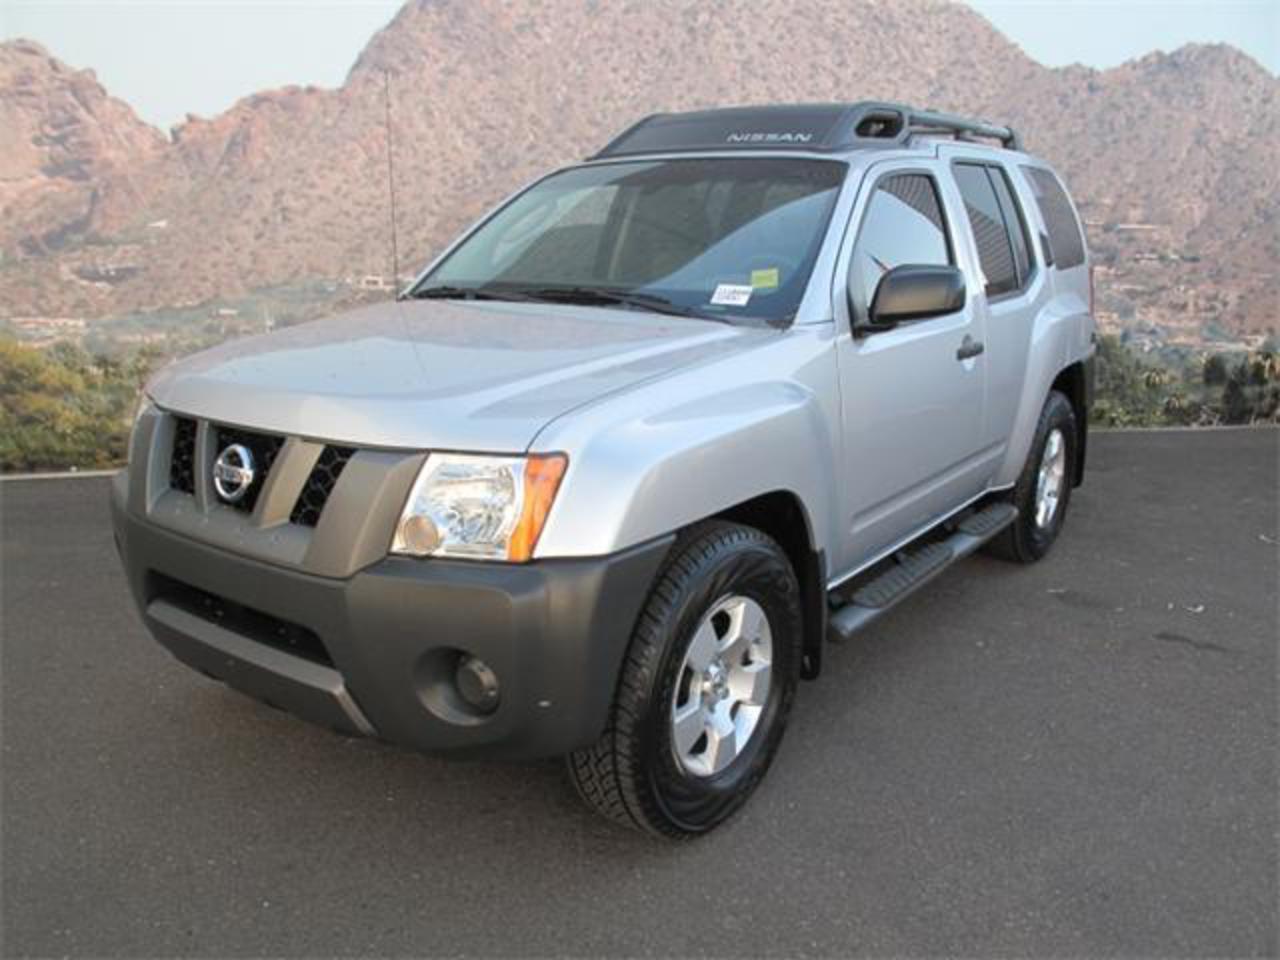 Specialty of 2008 Nissan Xterra SE 4X2 Car is that it is available in the